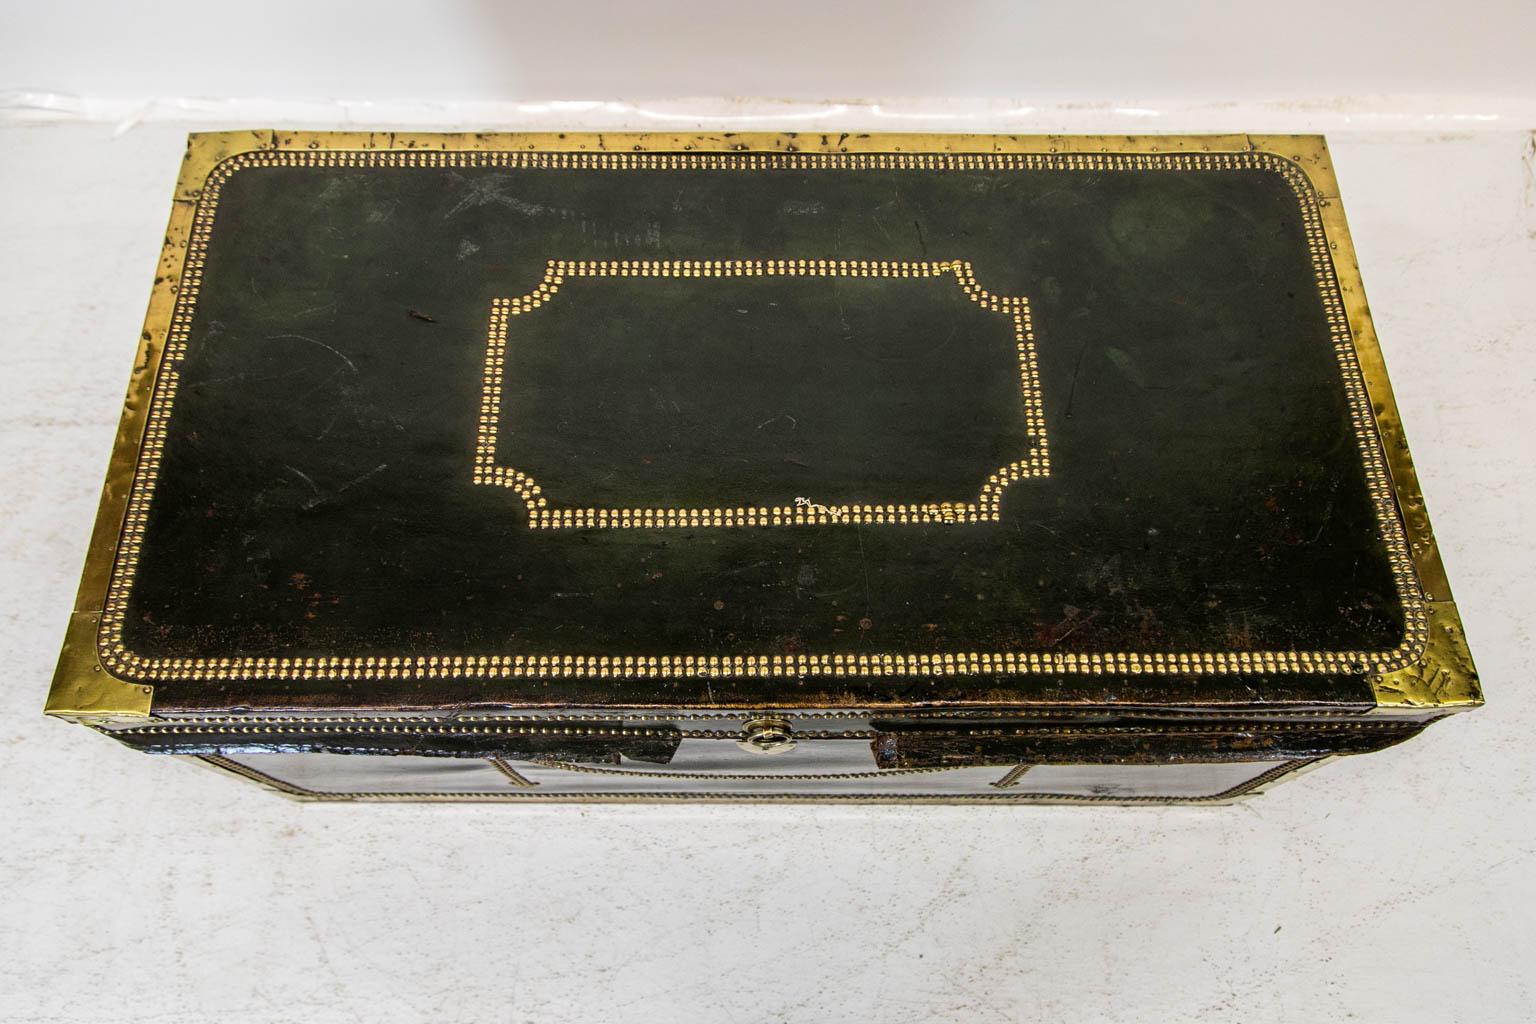 This trunk has repeating brass stud work that frames the top with a studded panel. A few of the brass studs have been replaced and a few are missing. The top and edges have a solid brass border except for the front top edge which was removed at some